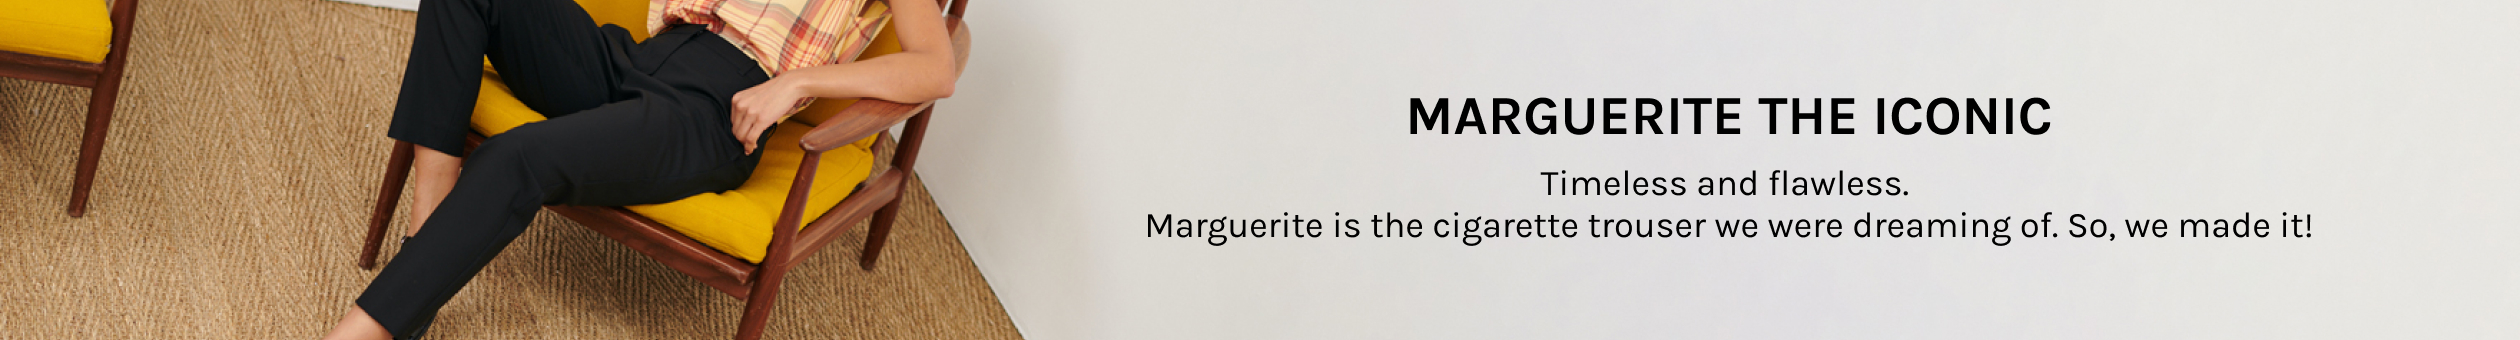 Marguerite, iconic trousers